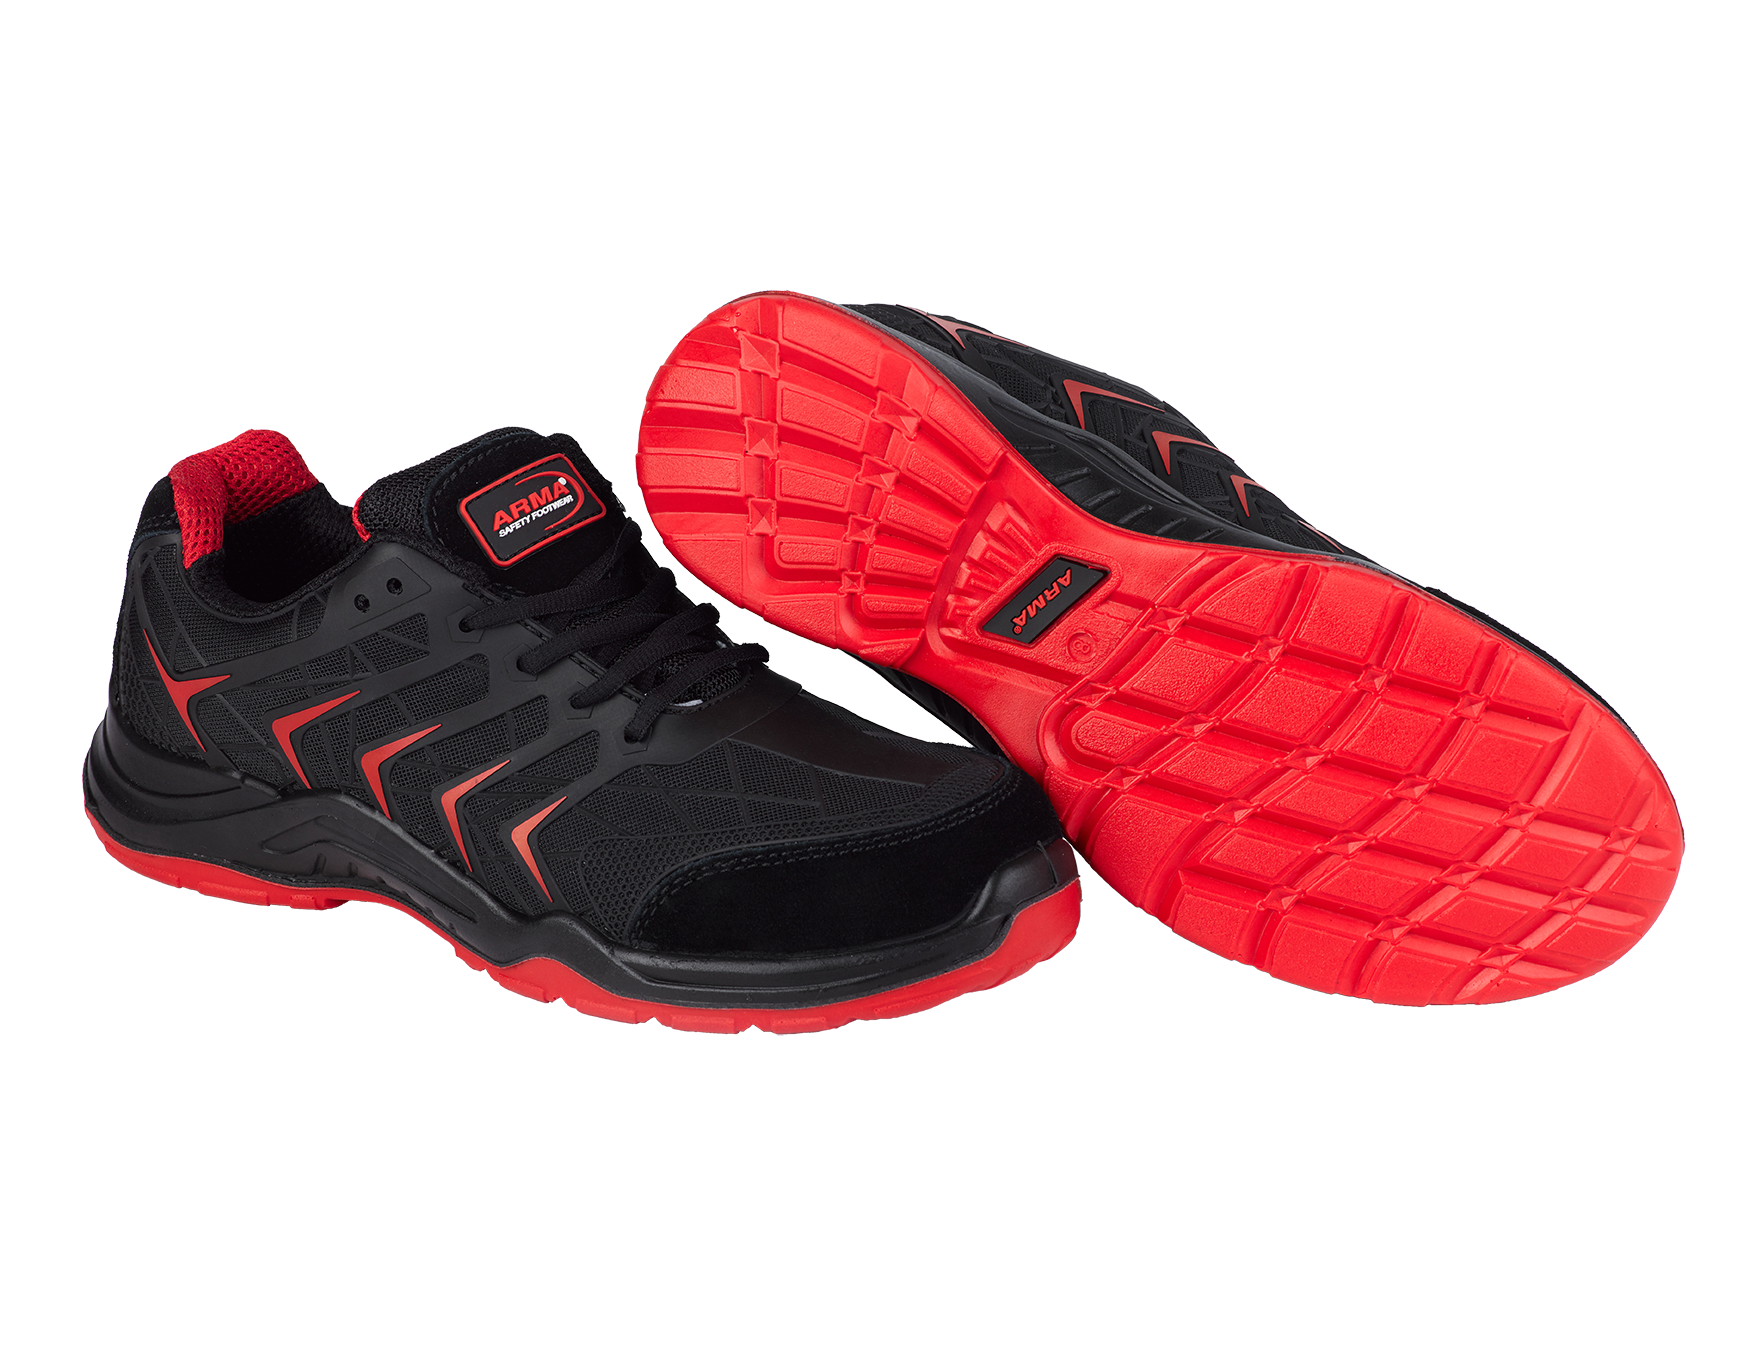 VIPER S1P SAFETY TRAINERS ARMA, SLIPRESISTANT & COMFORTABLE FOR INDUSTRIAL WORK (A10)